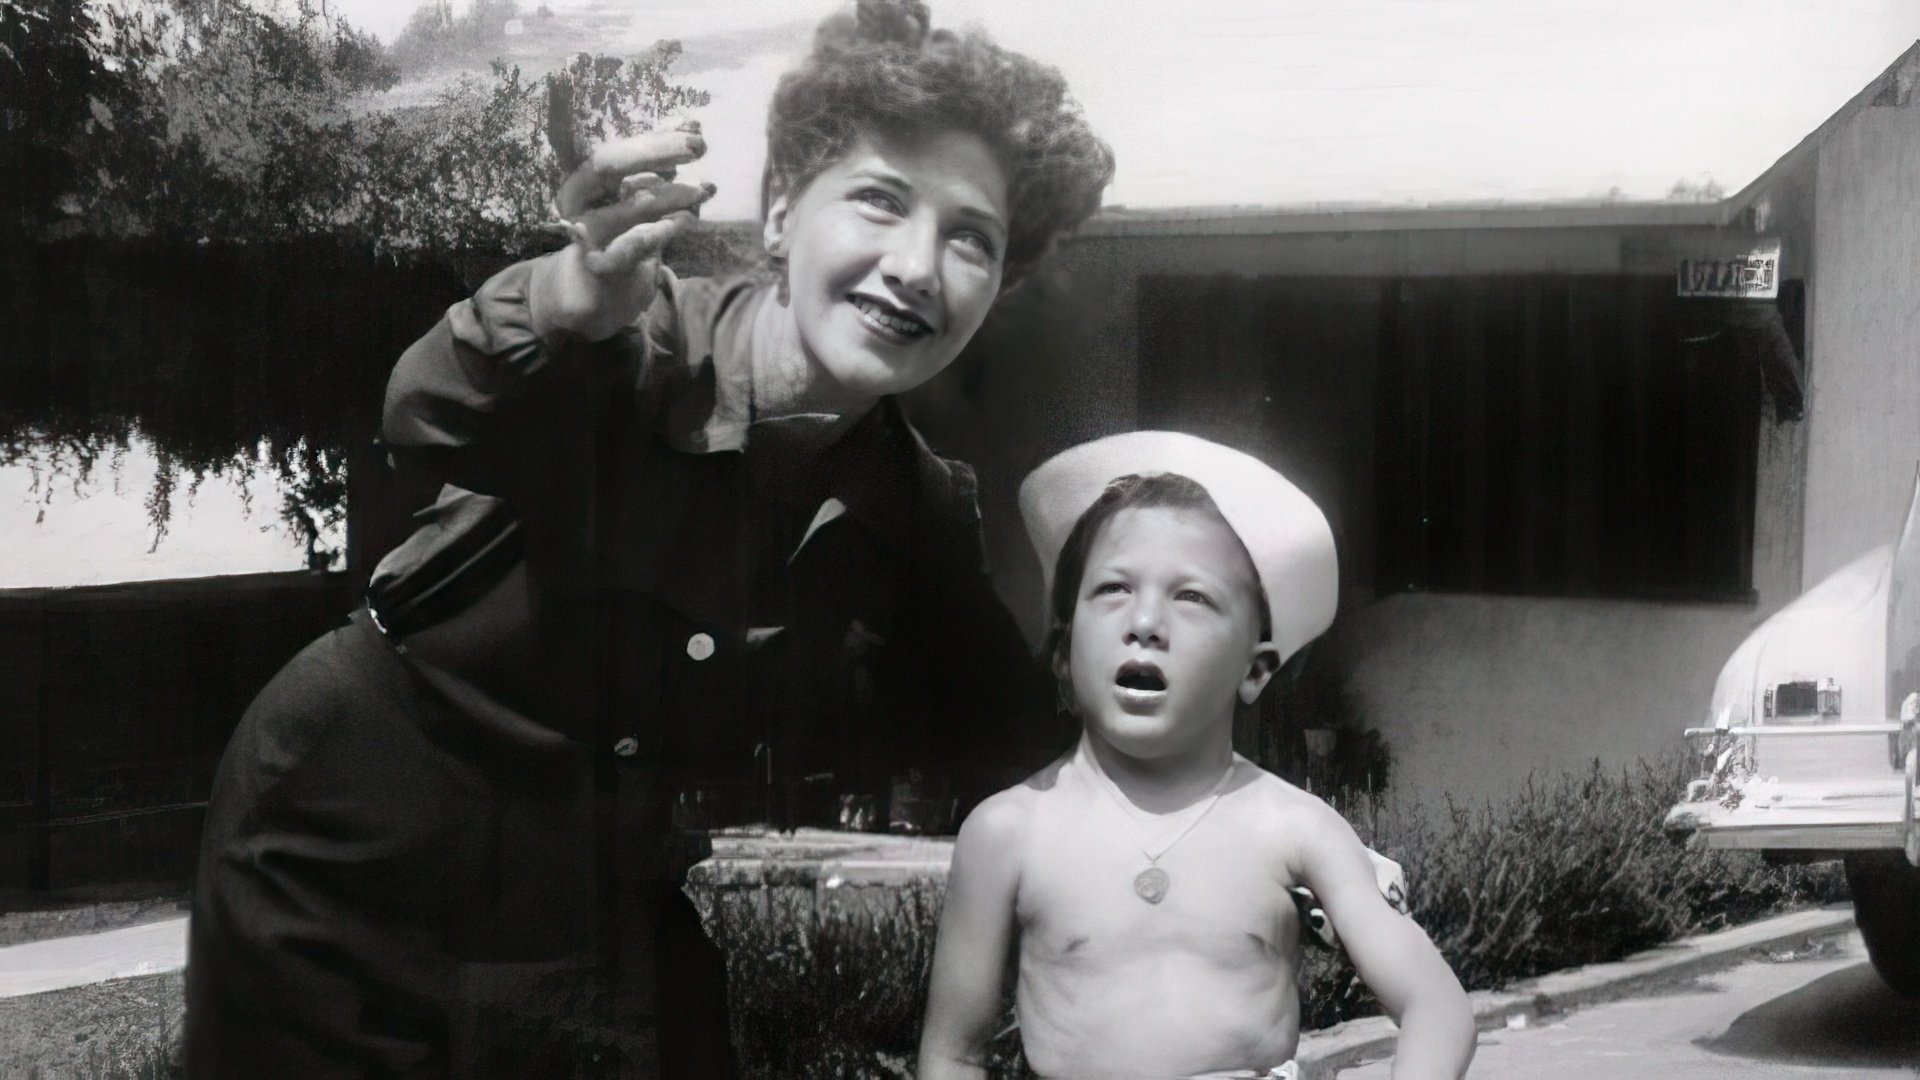 Dustin Hoffman in childhood with his mother